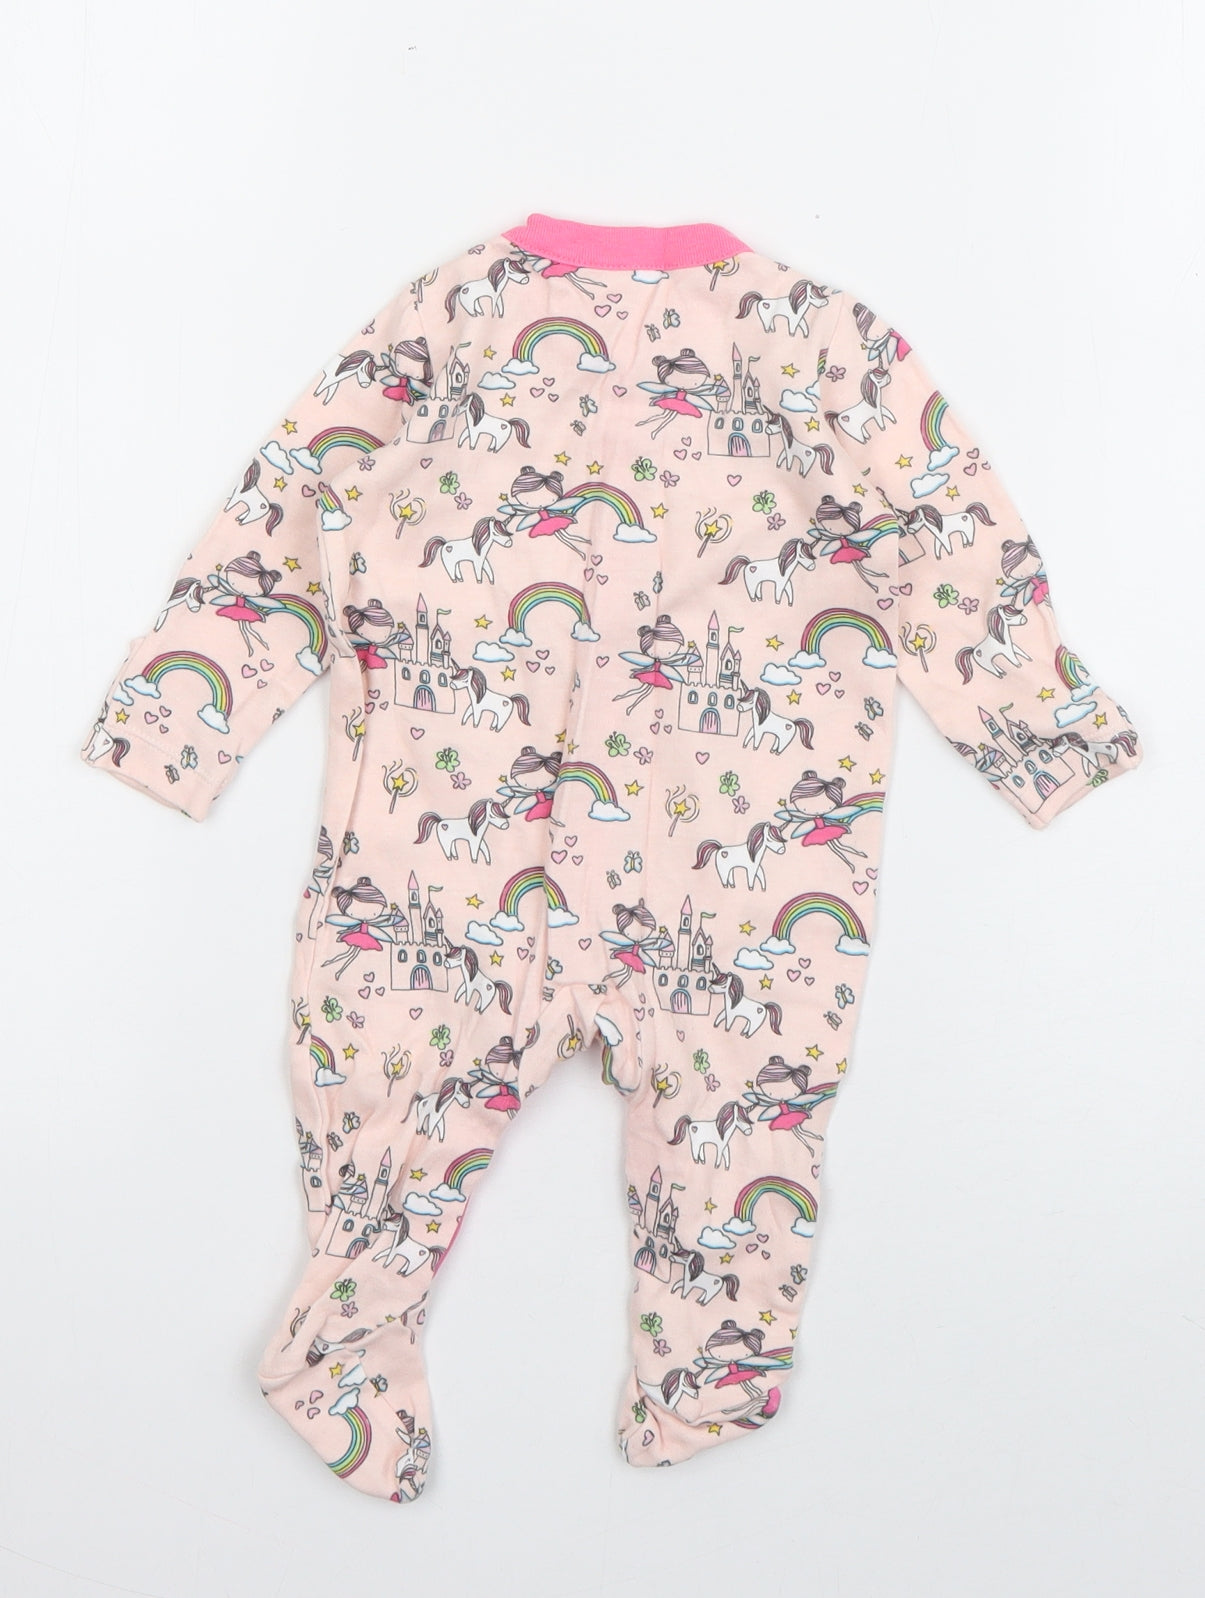 George Girls Pink Geometric Cotton Babygrow One-Piece Size 0-3 Months  Snap - Fairy Castle Print